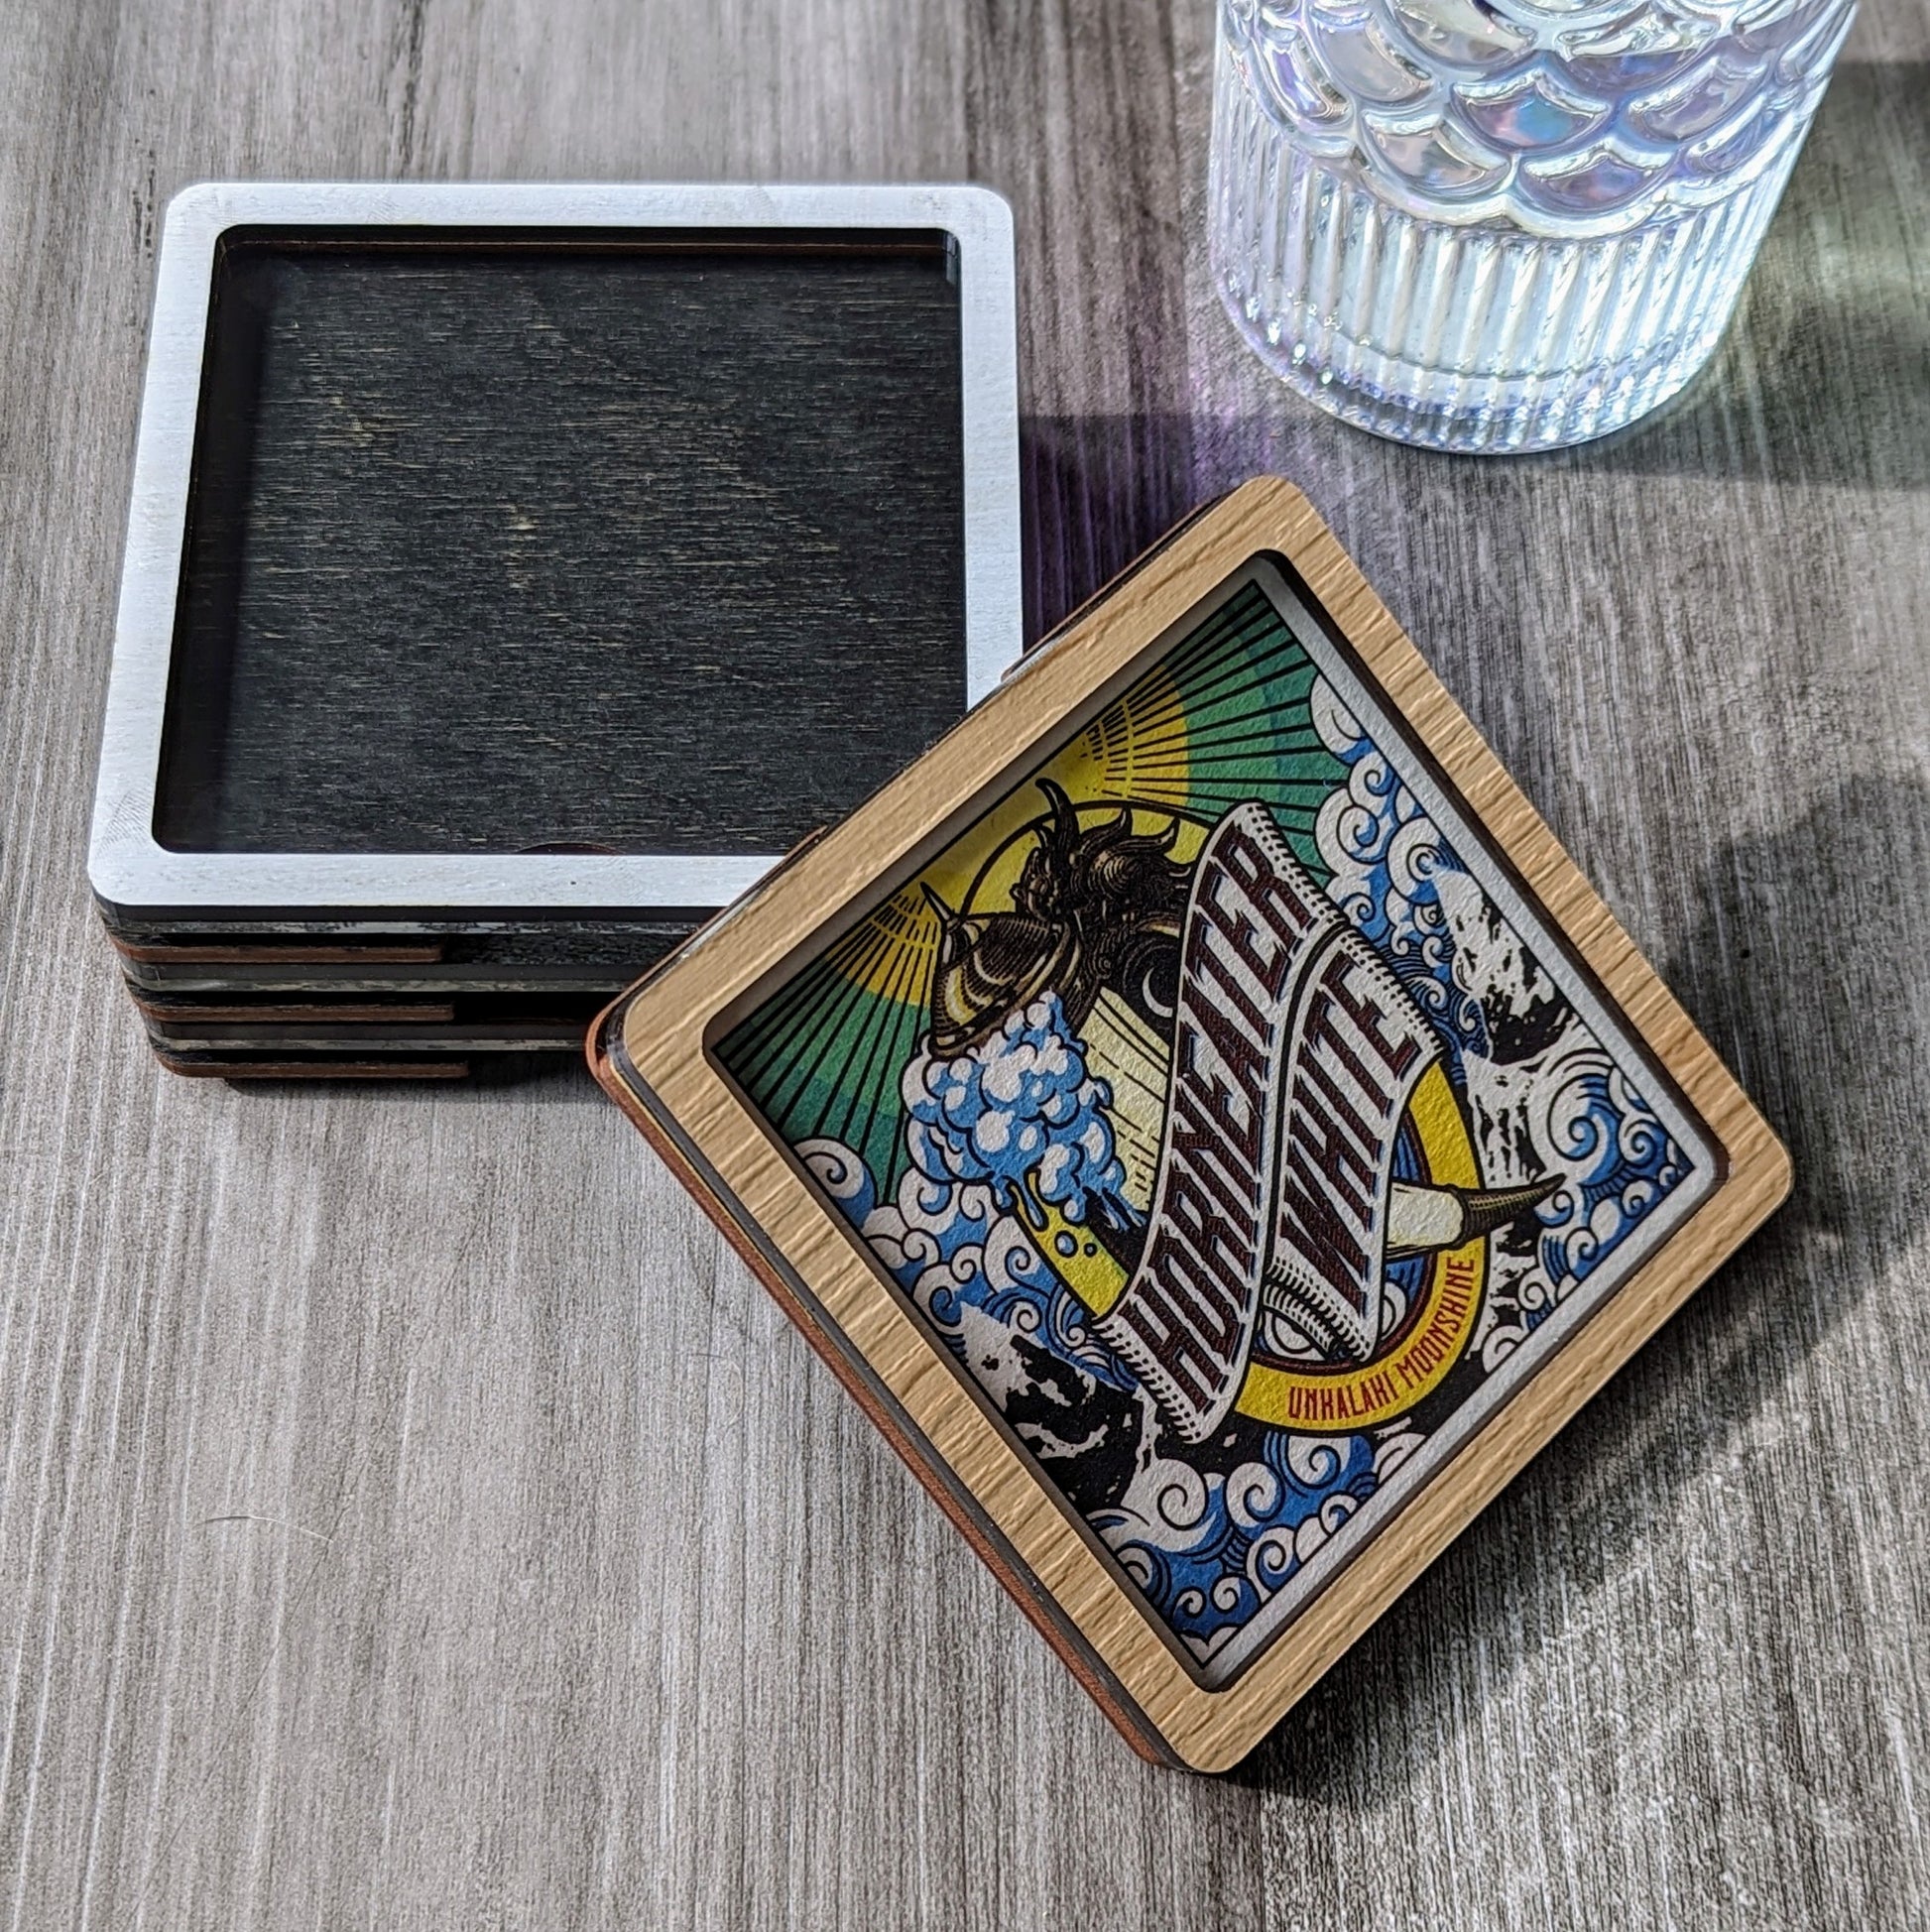 acrylic coaster case for paper coasters from brandon sanderson year of sanderson leatherbound coaster set